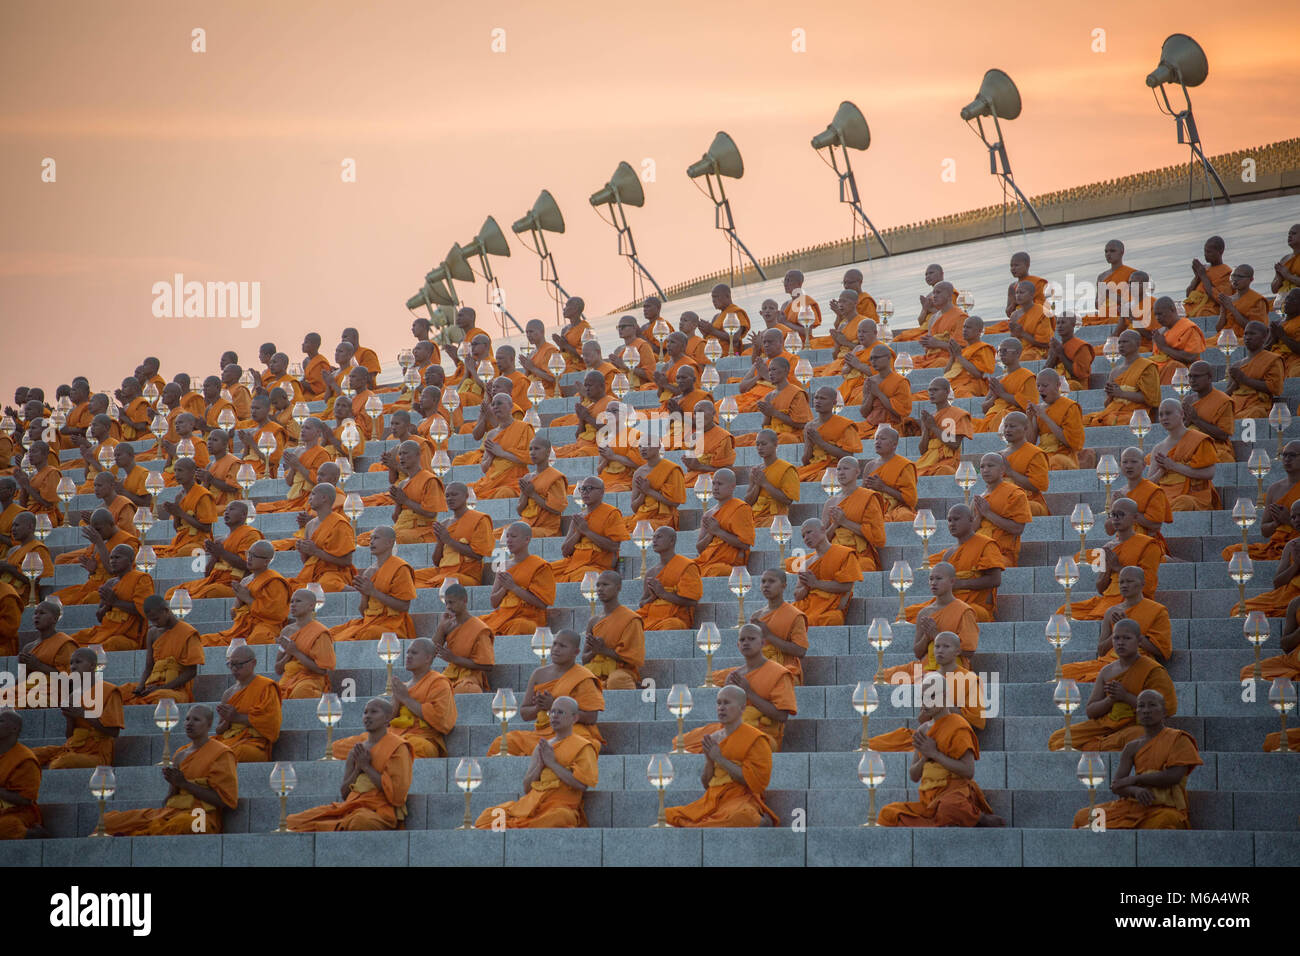 March 1, 2018 - Bangkok, Pathum Thani, Thailand - Monks seen praying while holding lanterns during the yearly Makha Bucha ceremony in the north of Bangkok. More than a thousand monks and hundred of thousand devotees were gathering at Dhammakaya Temple in Bangkok to attend the lighting ceremony. (Credit Image: © Geem Drake/SOPA Images via ZUMA Wire) Stock Photo